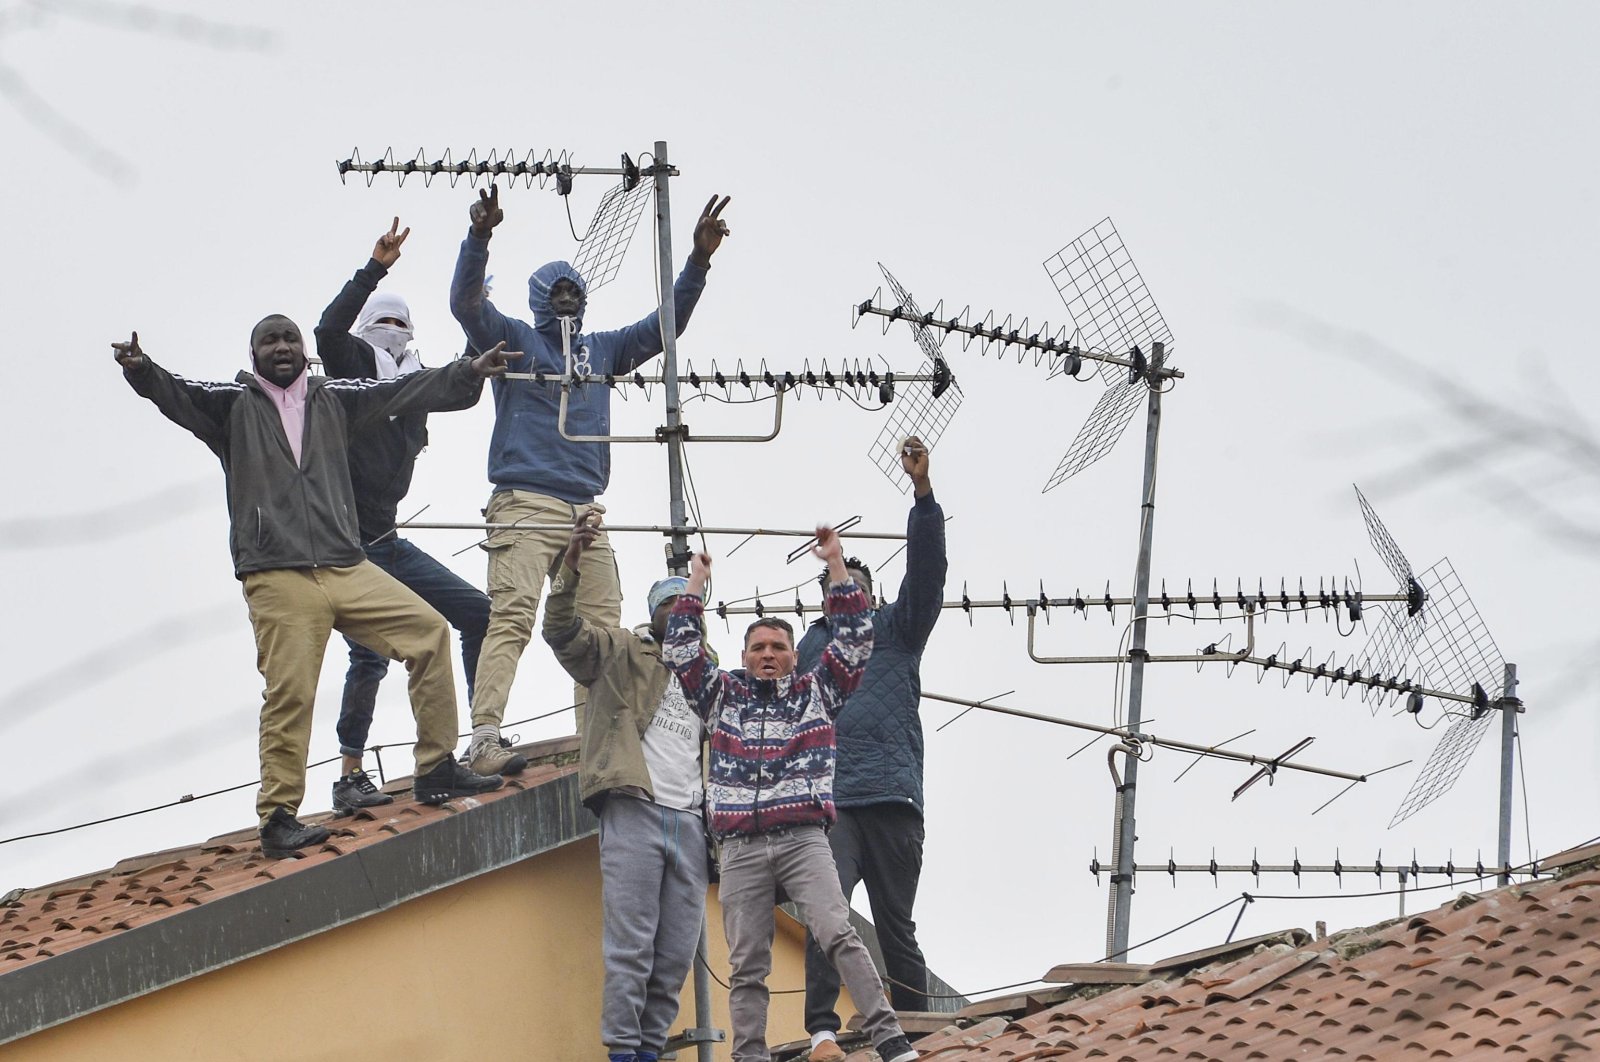 Detainees protest on the roofs of the San Vittore Prison in Milan, northern Italy, March 9, 2020. (EPA Photo)